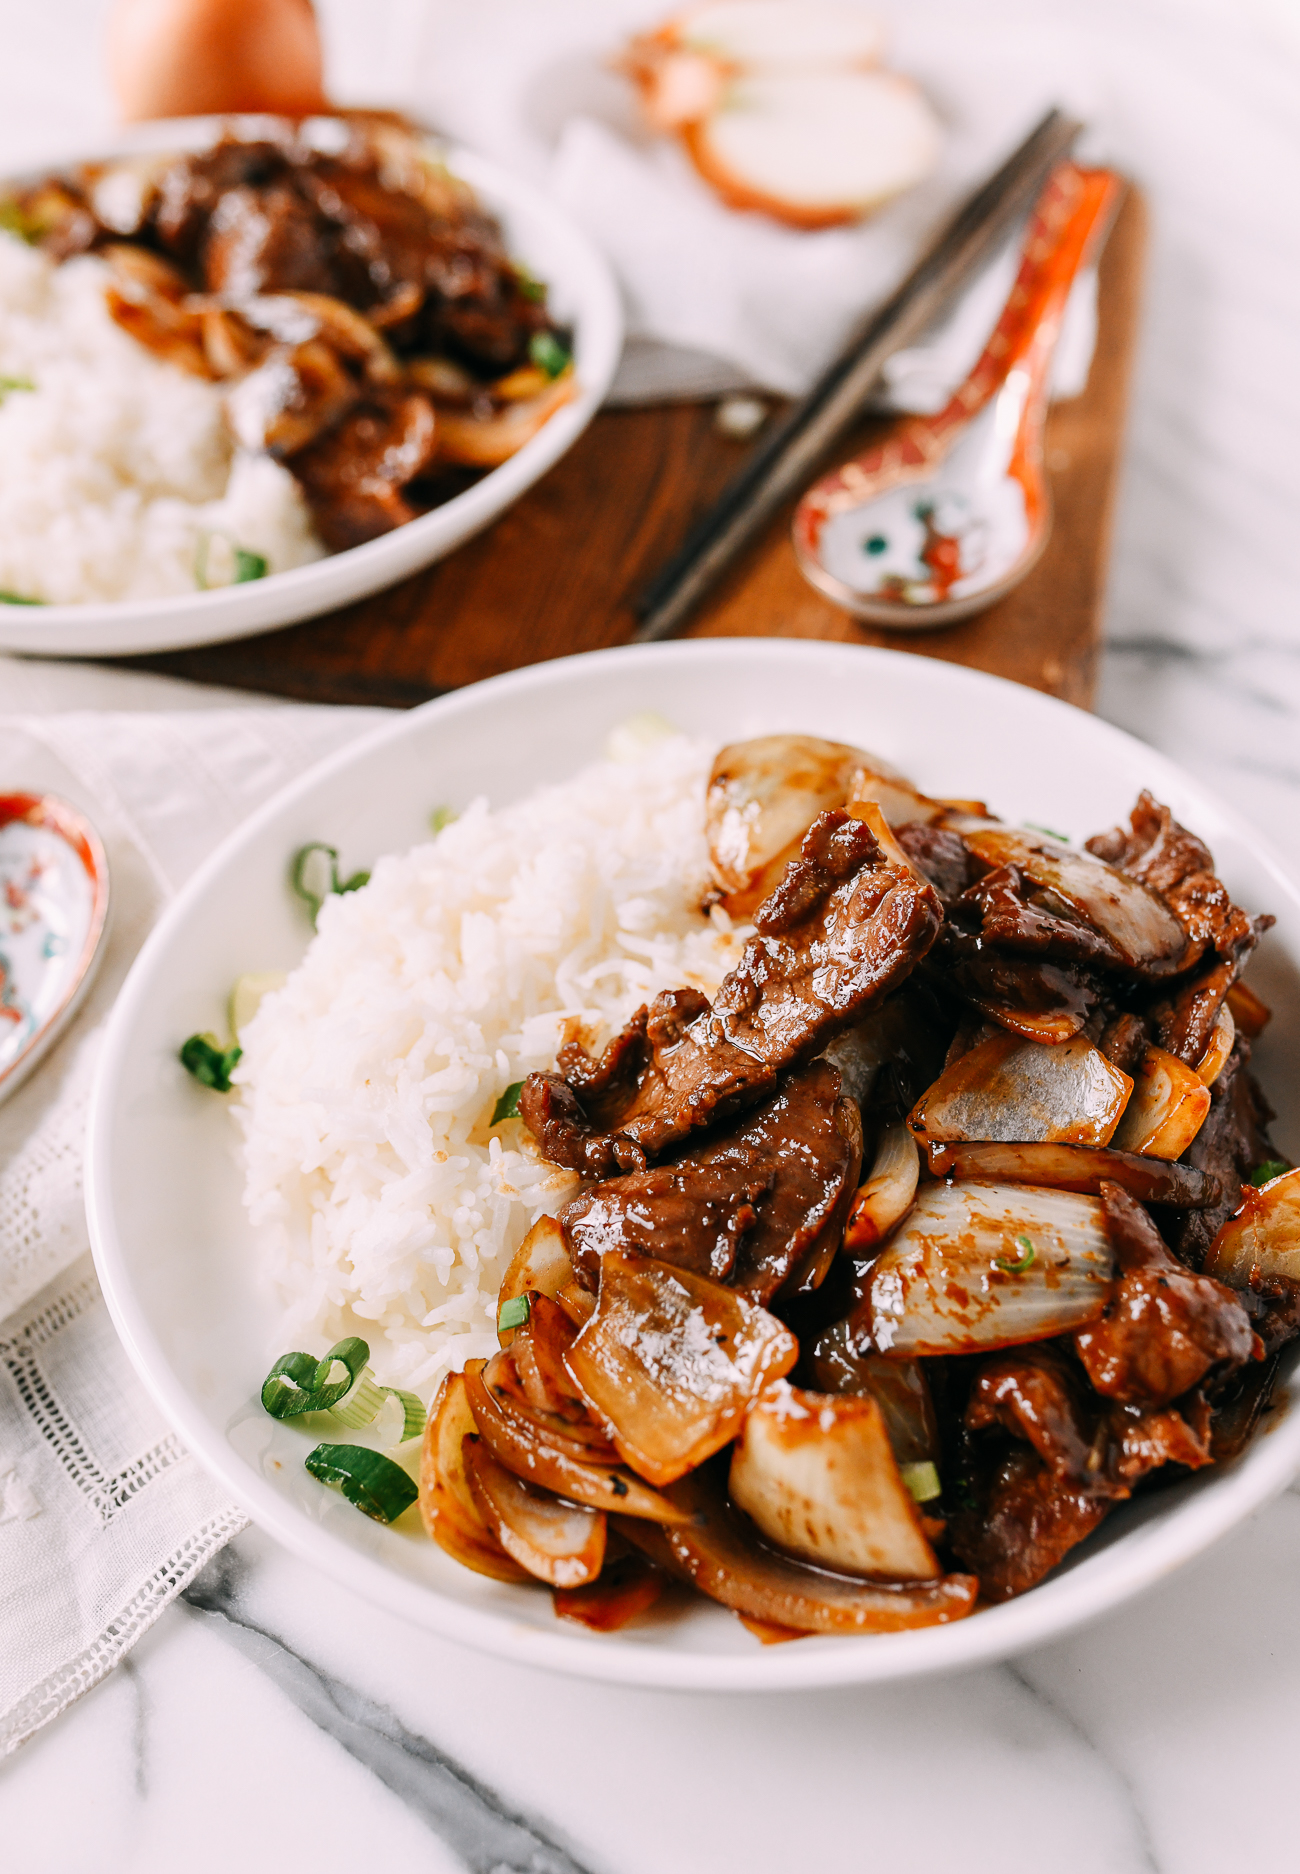 Beef and onion stir-fry